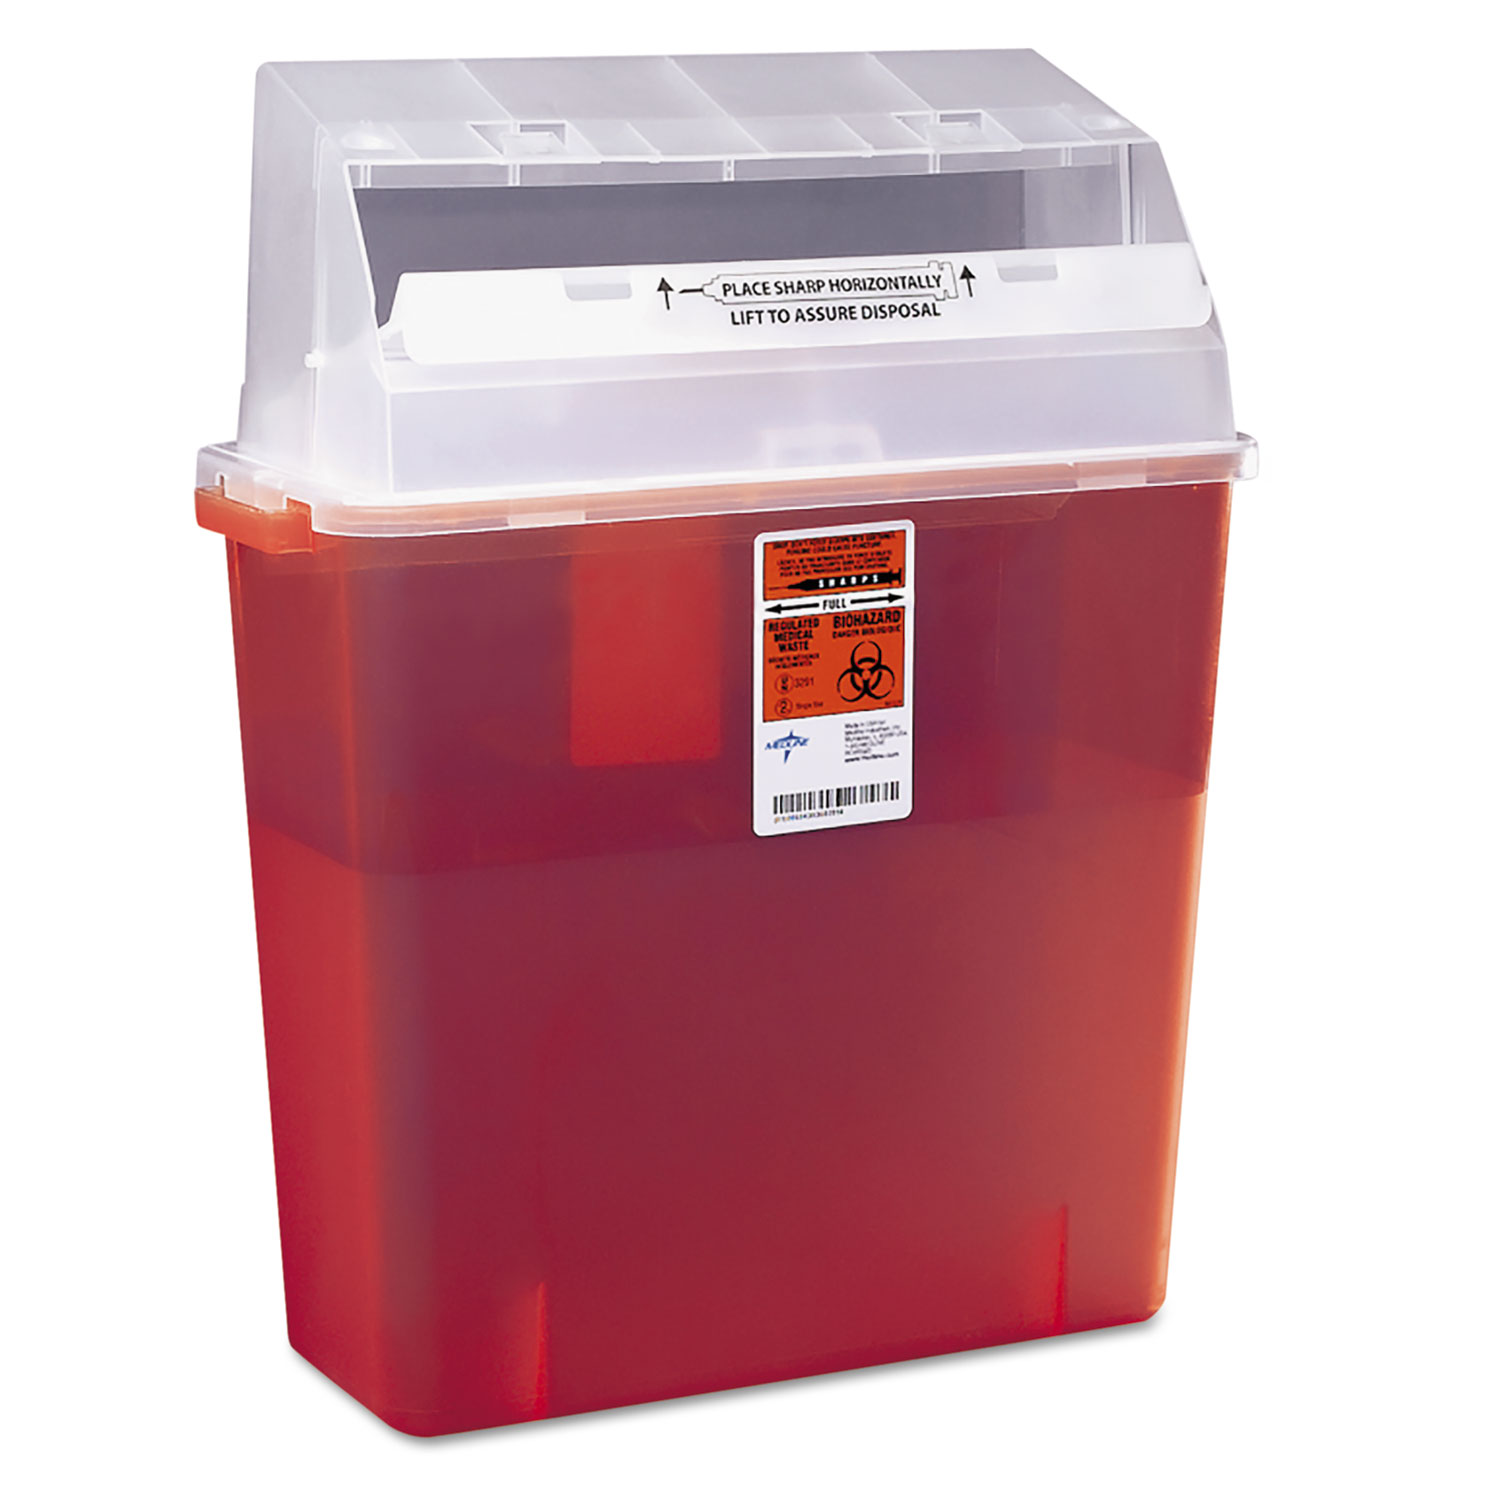 Sharps Container for Patient Room, Plastic, 3gal, Rectangular, Red